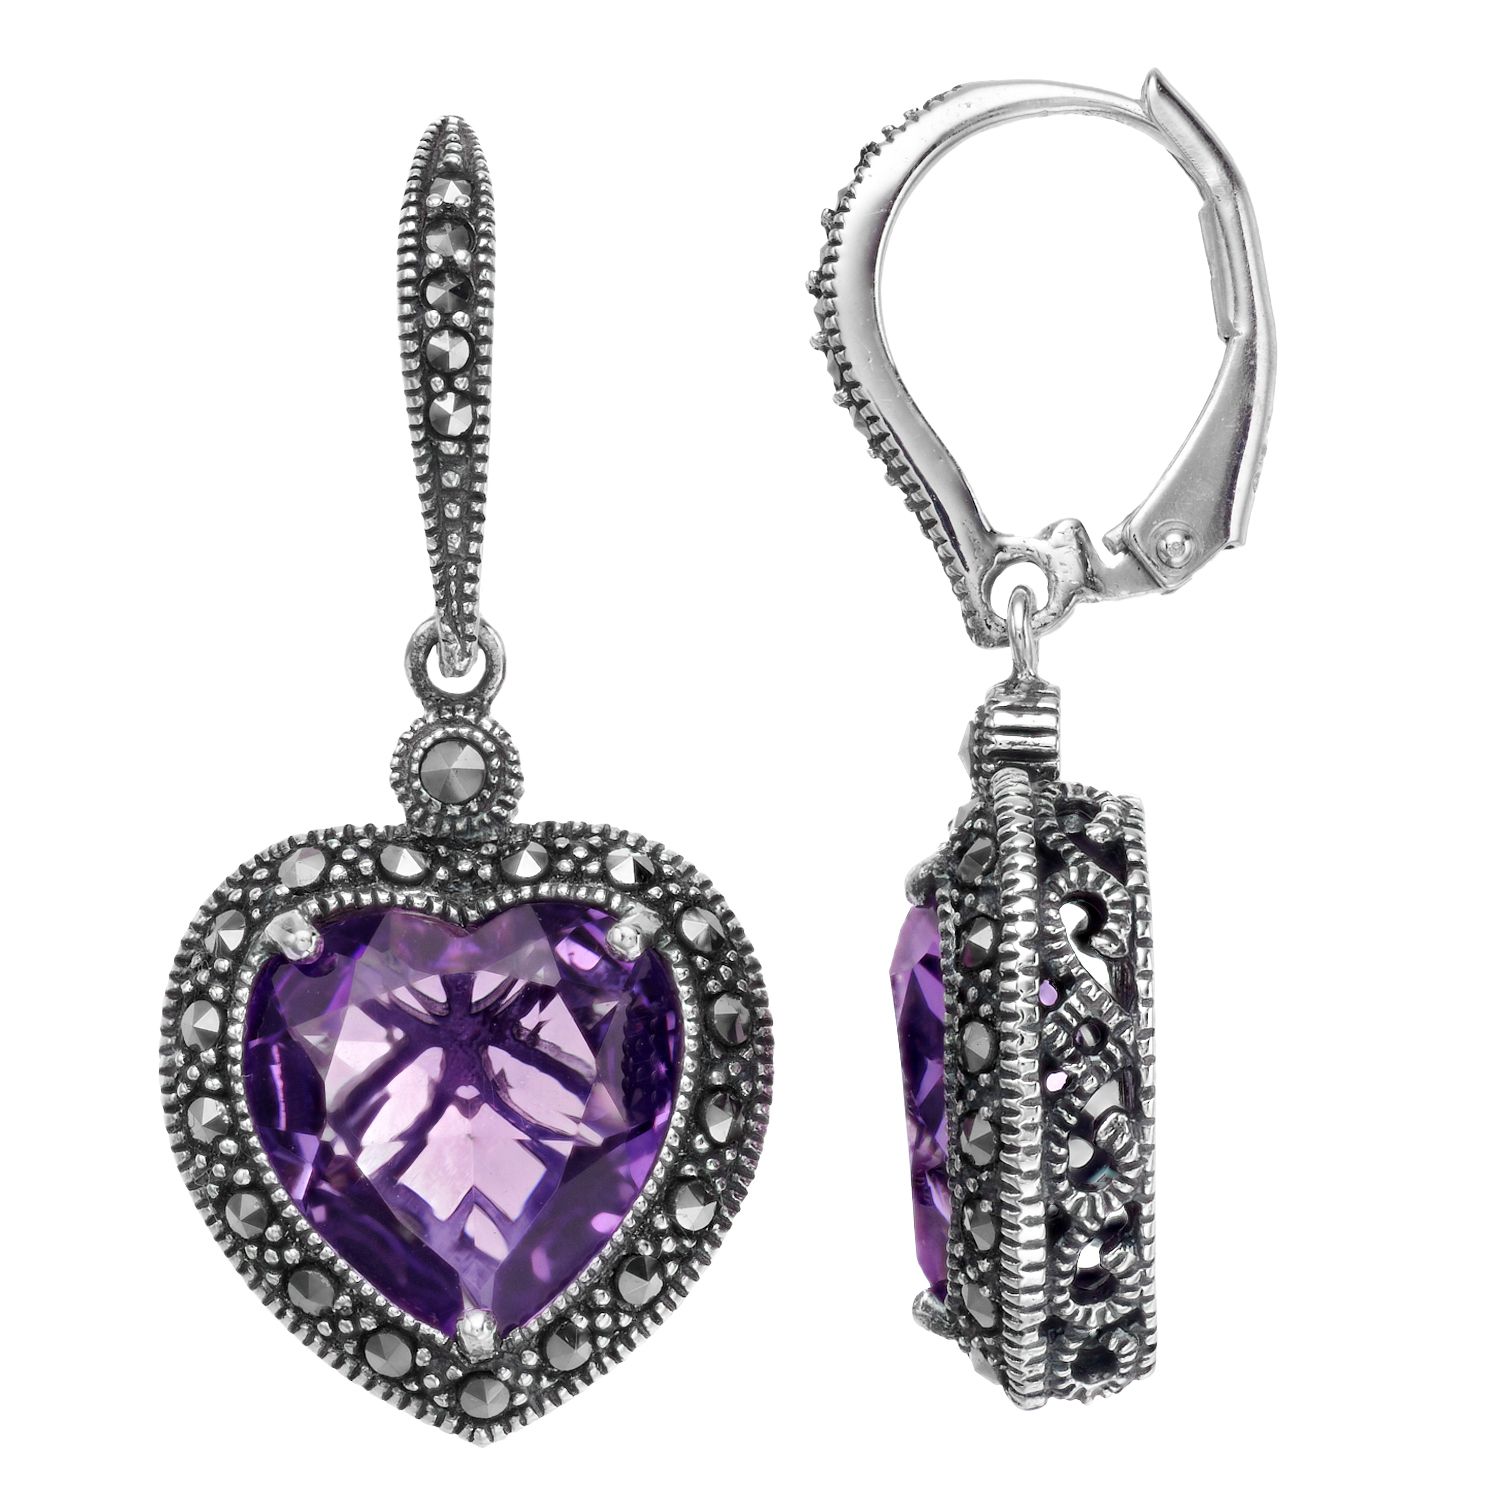 Image for Lavish by TJM Sterling Silver Lab-Created Amethyst & Marcasite Heart Earrings at Kohl's.